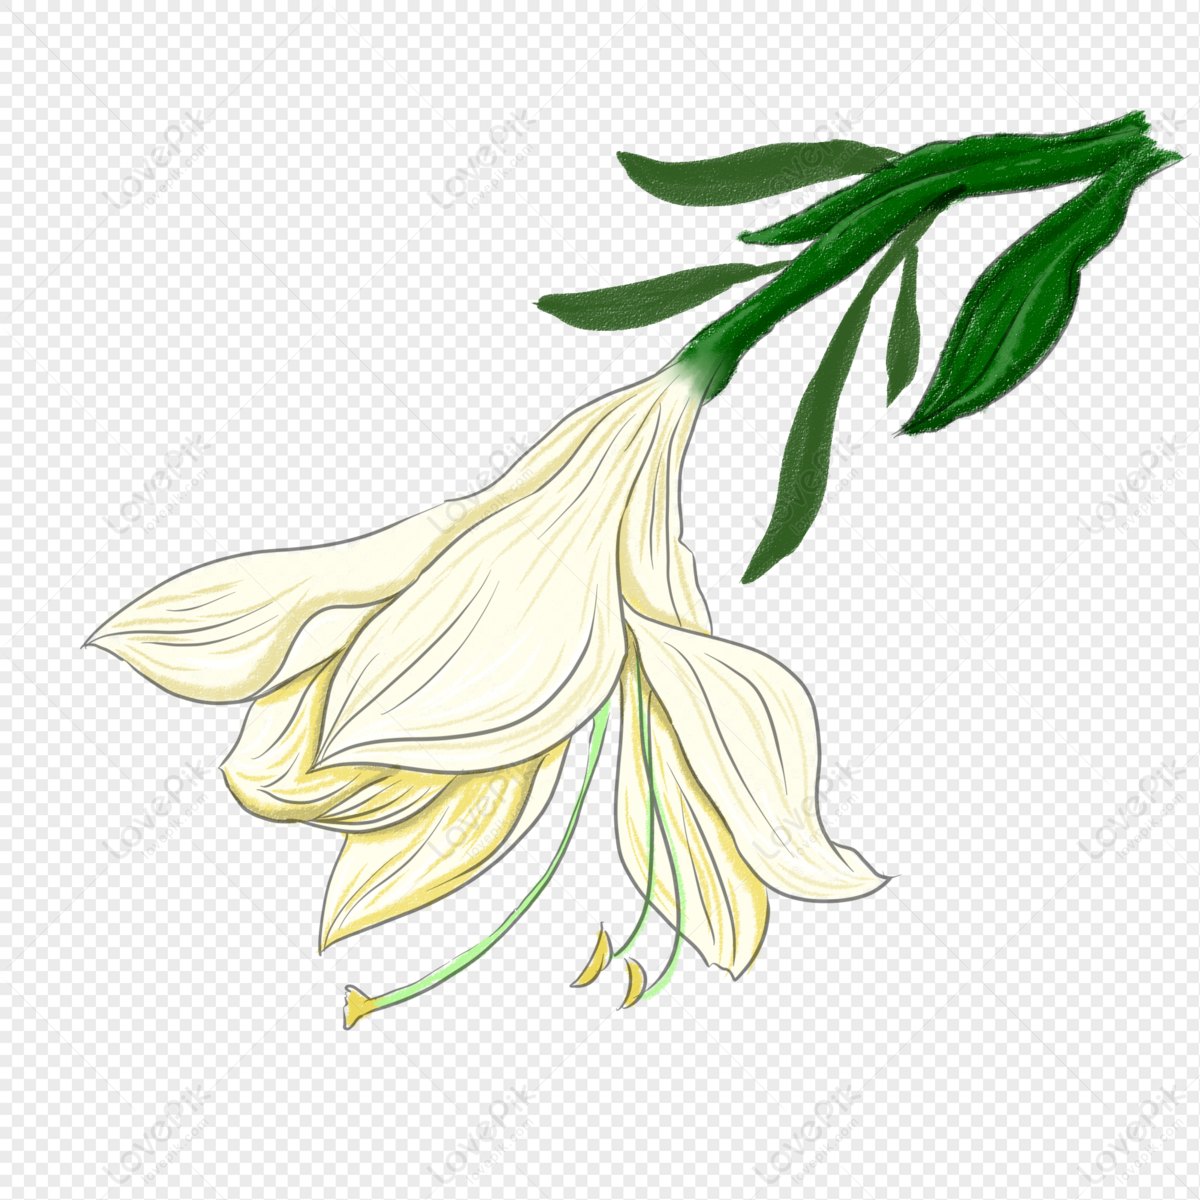 lovepik lily png image 401333049 wh1200